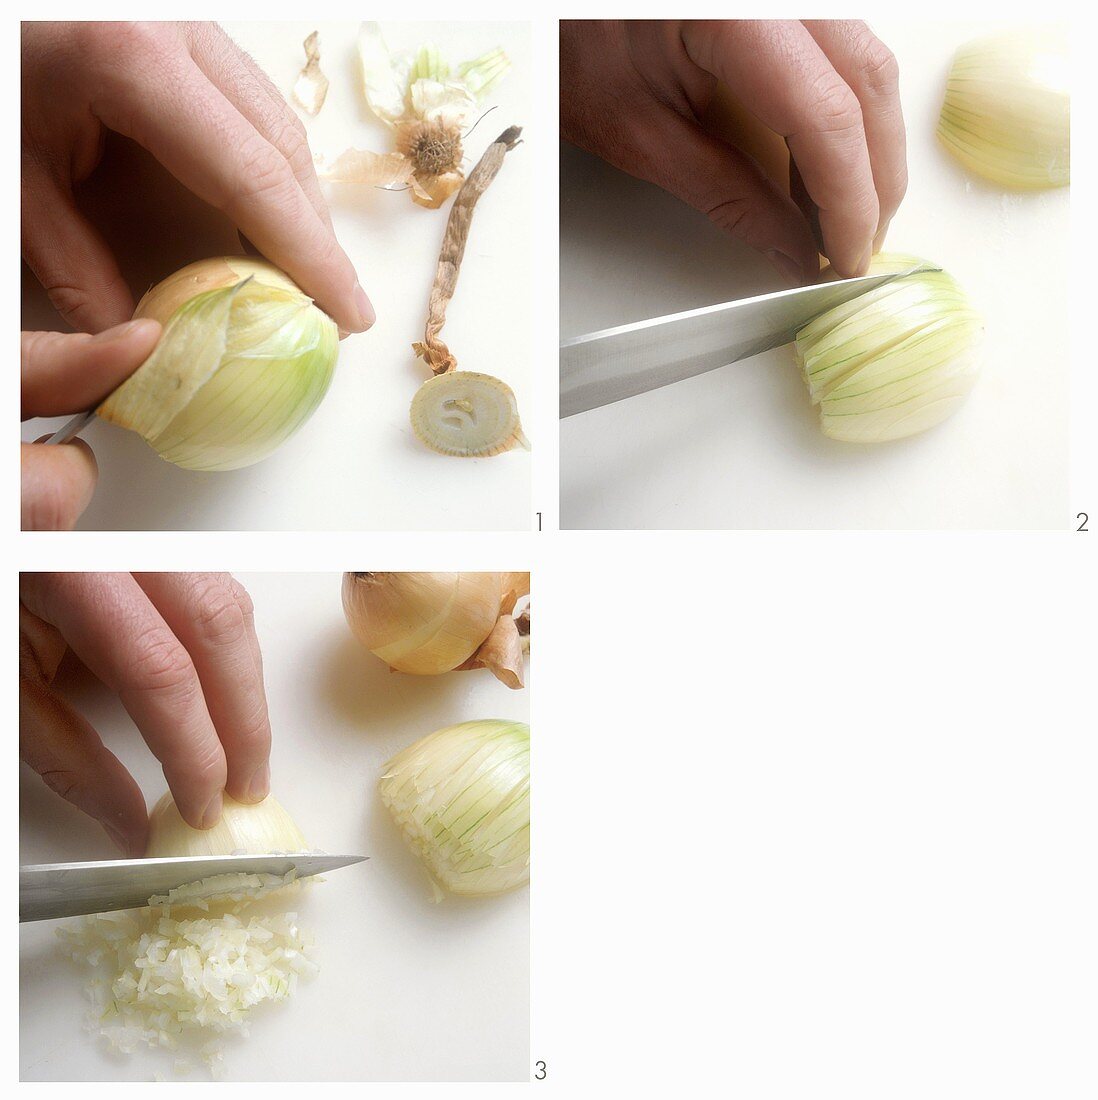 Peeling and dicing onions